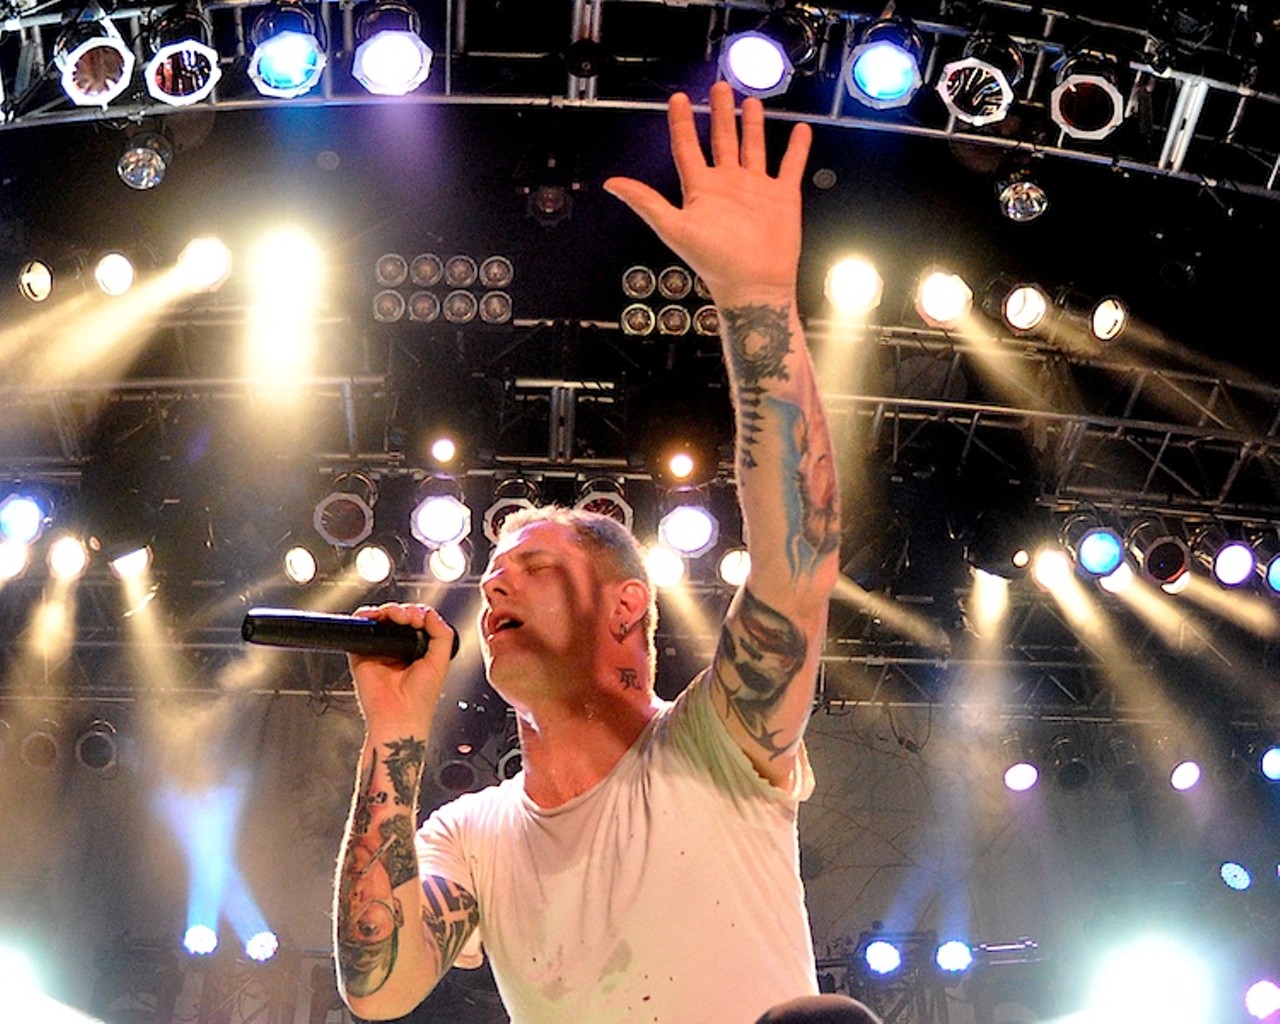 Stone Sour and Pop Evil performing last night at House of Blues